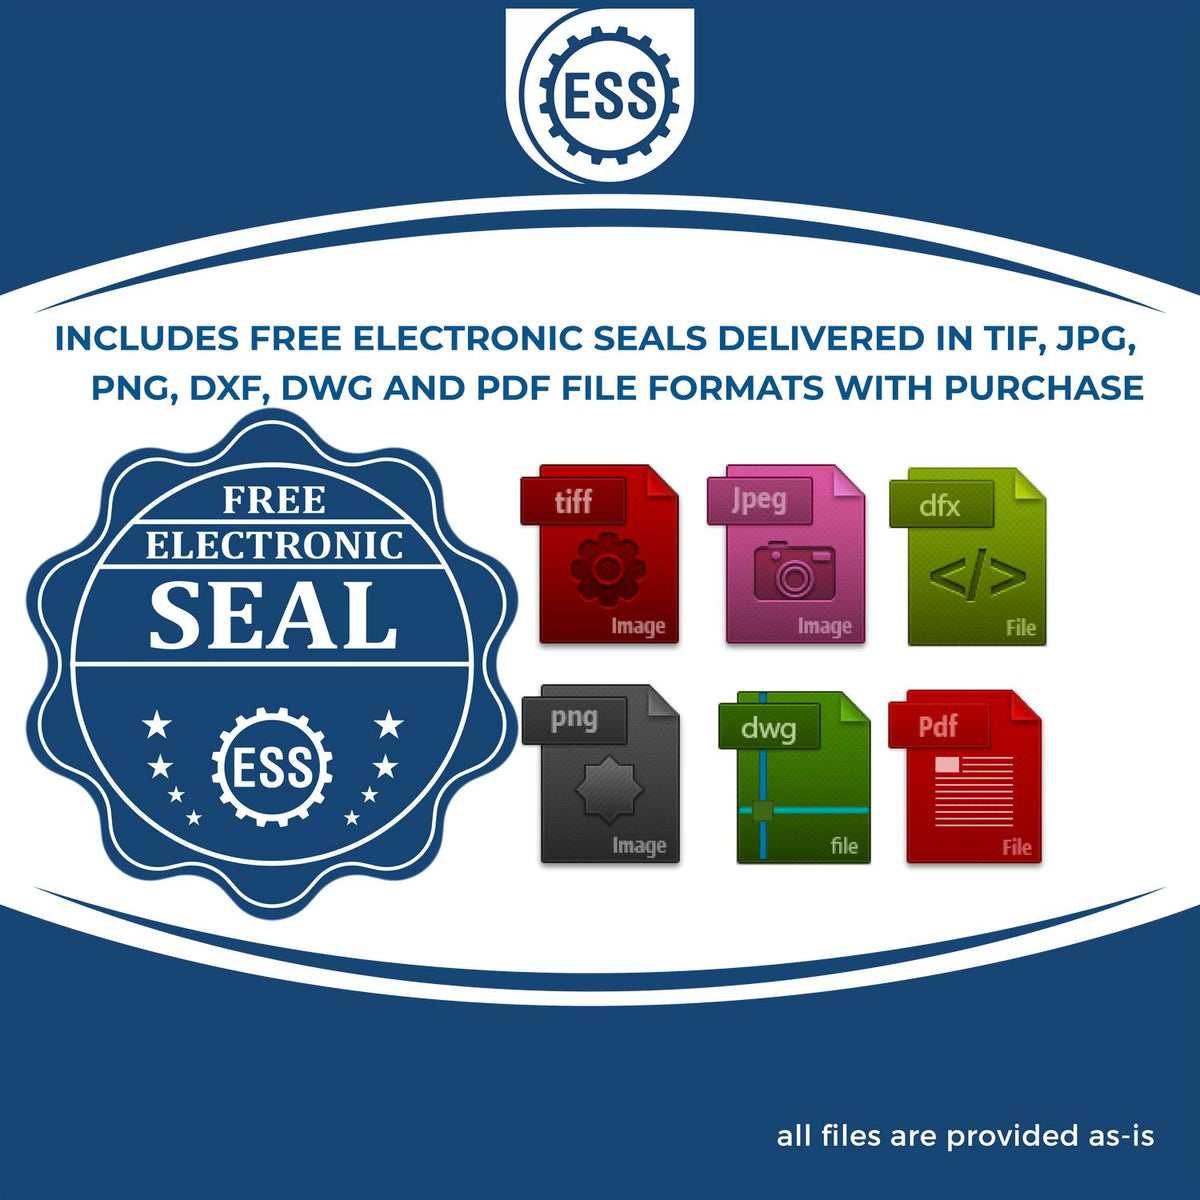 An infographic for the free electronic seal for the Slim Pre-Inked Mississippi Professional Engineer Seal Stamp illustrating the different file type icons such as DXF, DWG, TIF, JPG and PNG.